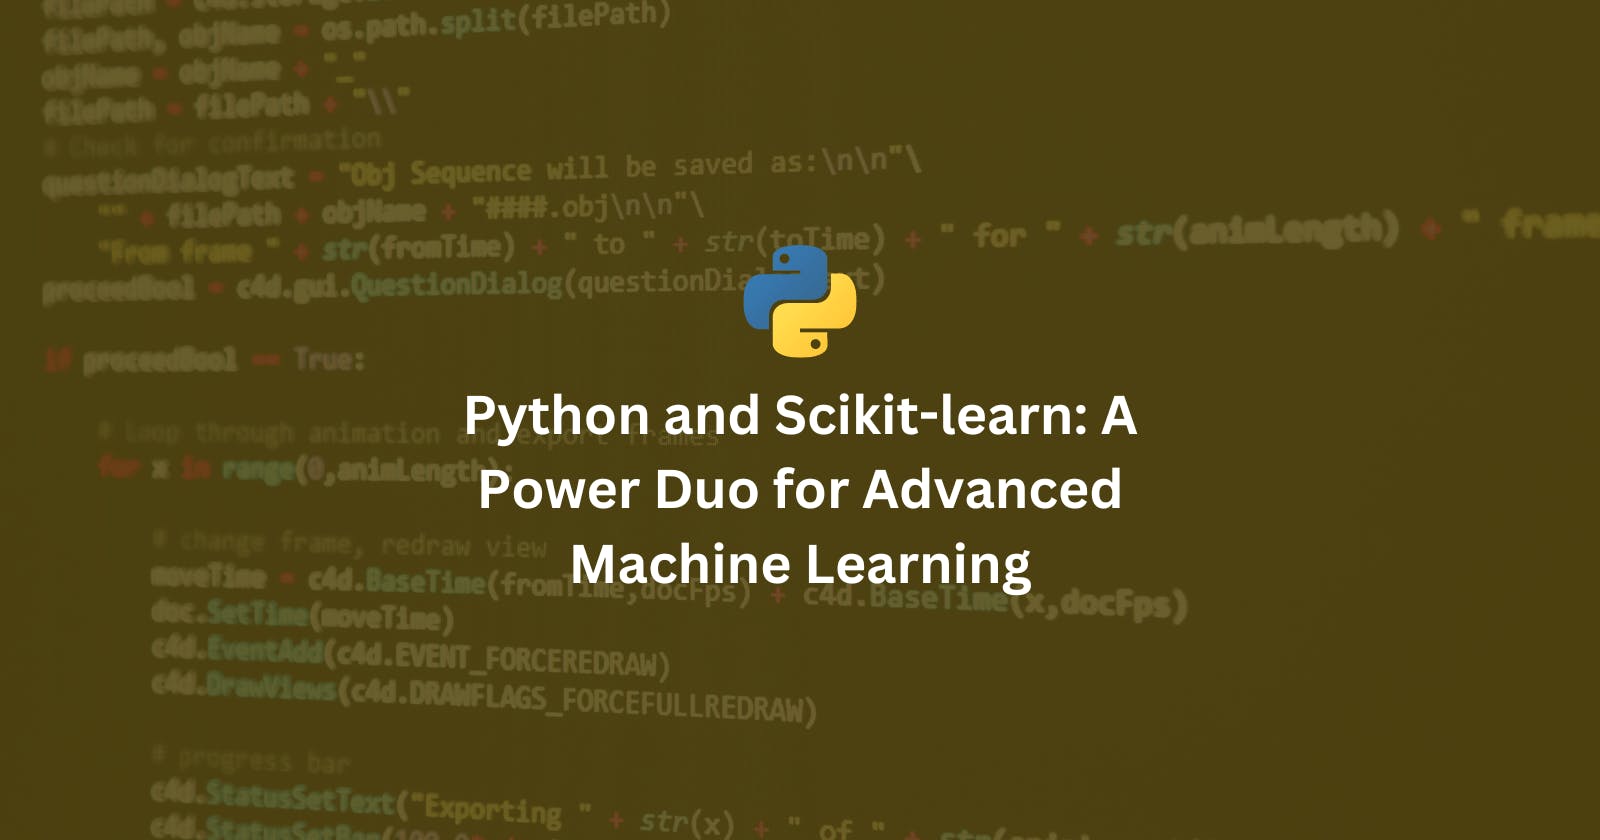 Python and Scikit-learn: A Power Duo for Advanced Machine Learning